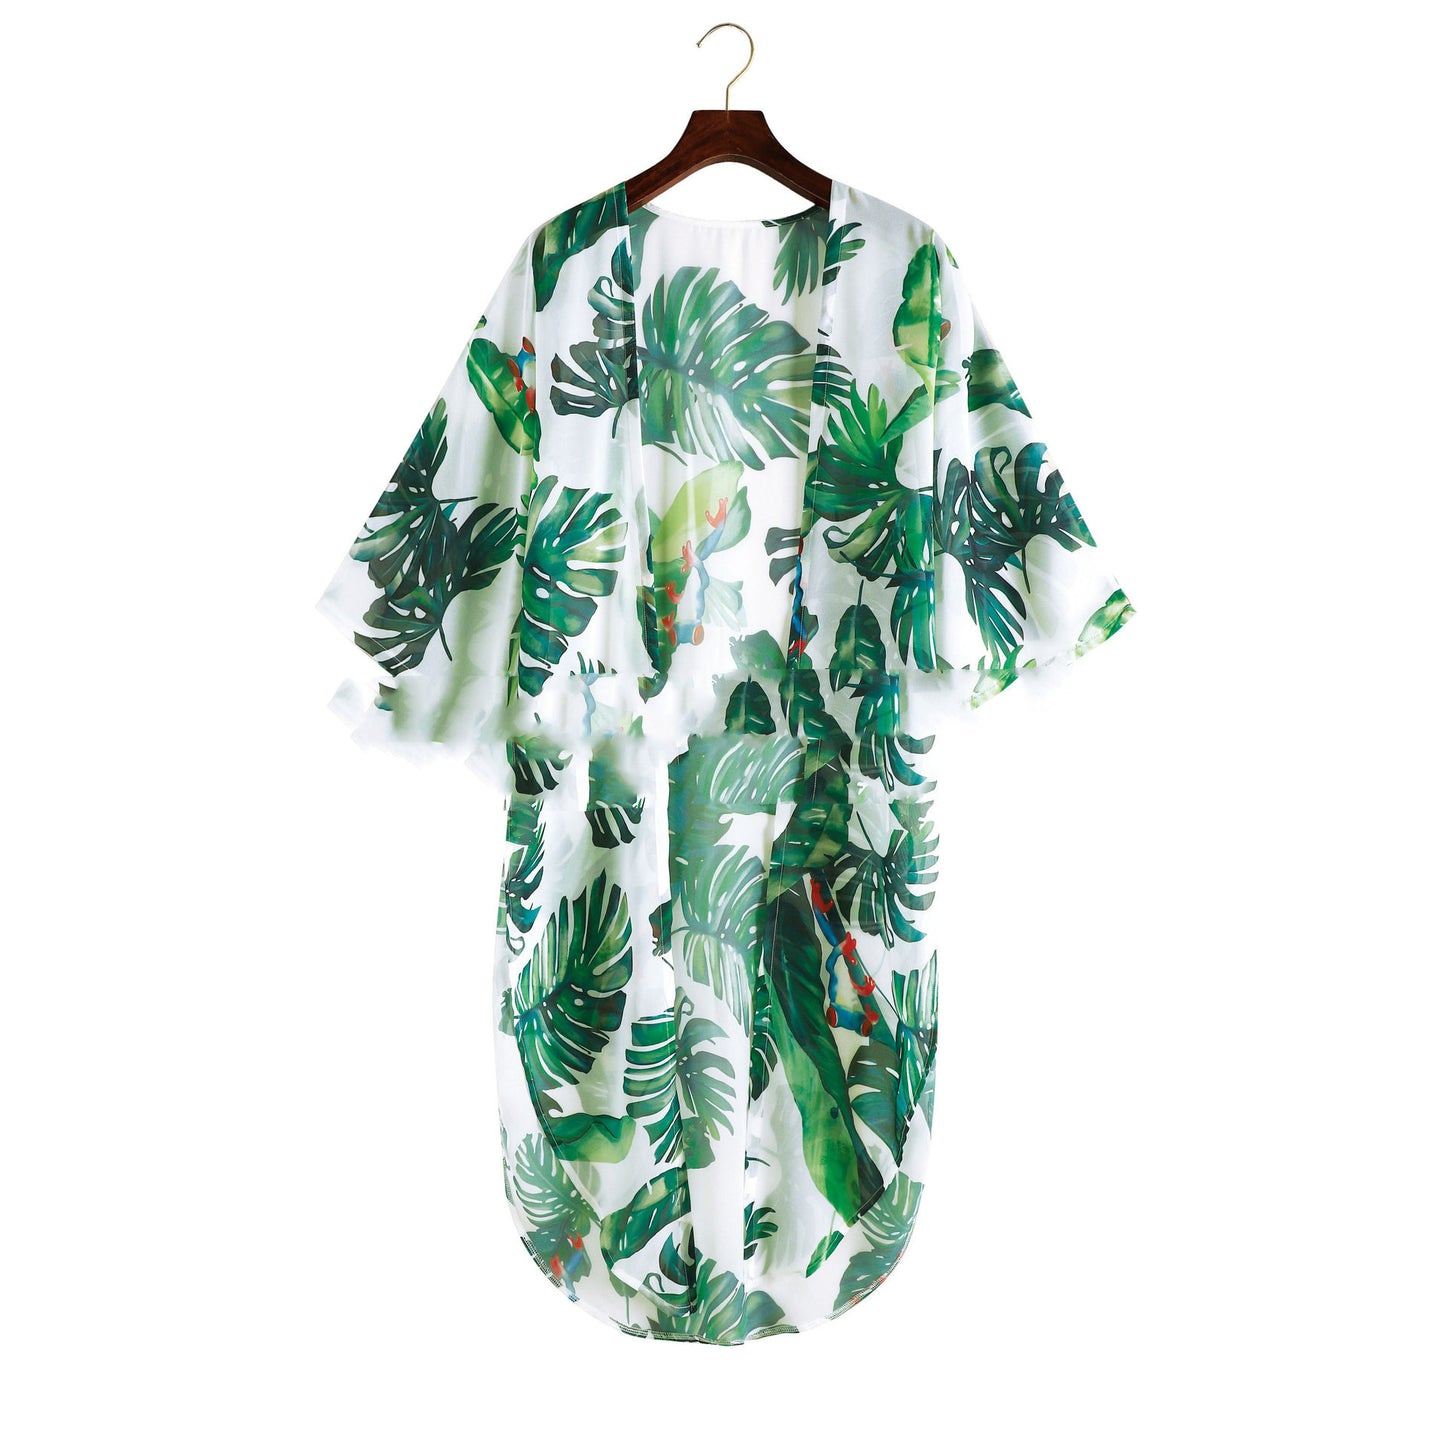 Beach Ready & Light: This chiffon Hawaiian shirt adds a touch of breezy island style to your summer look.